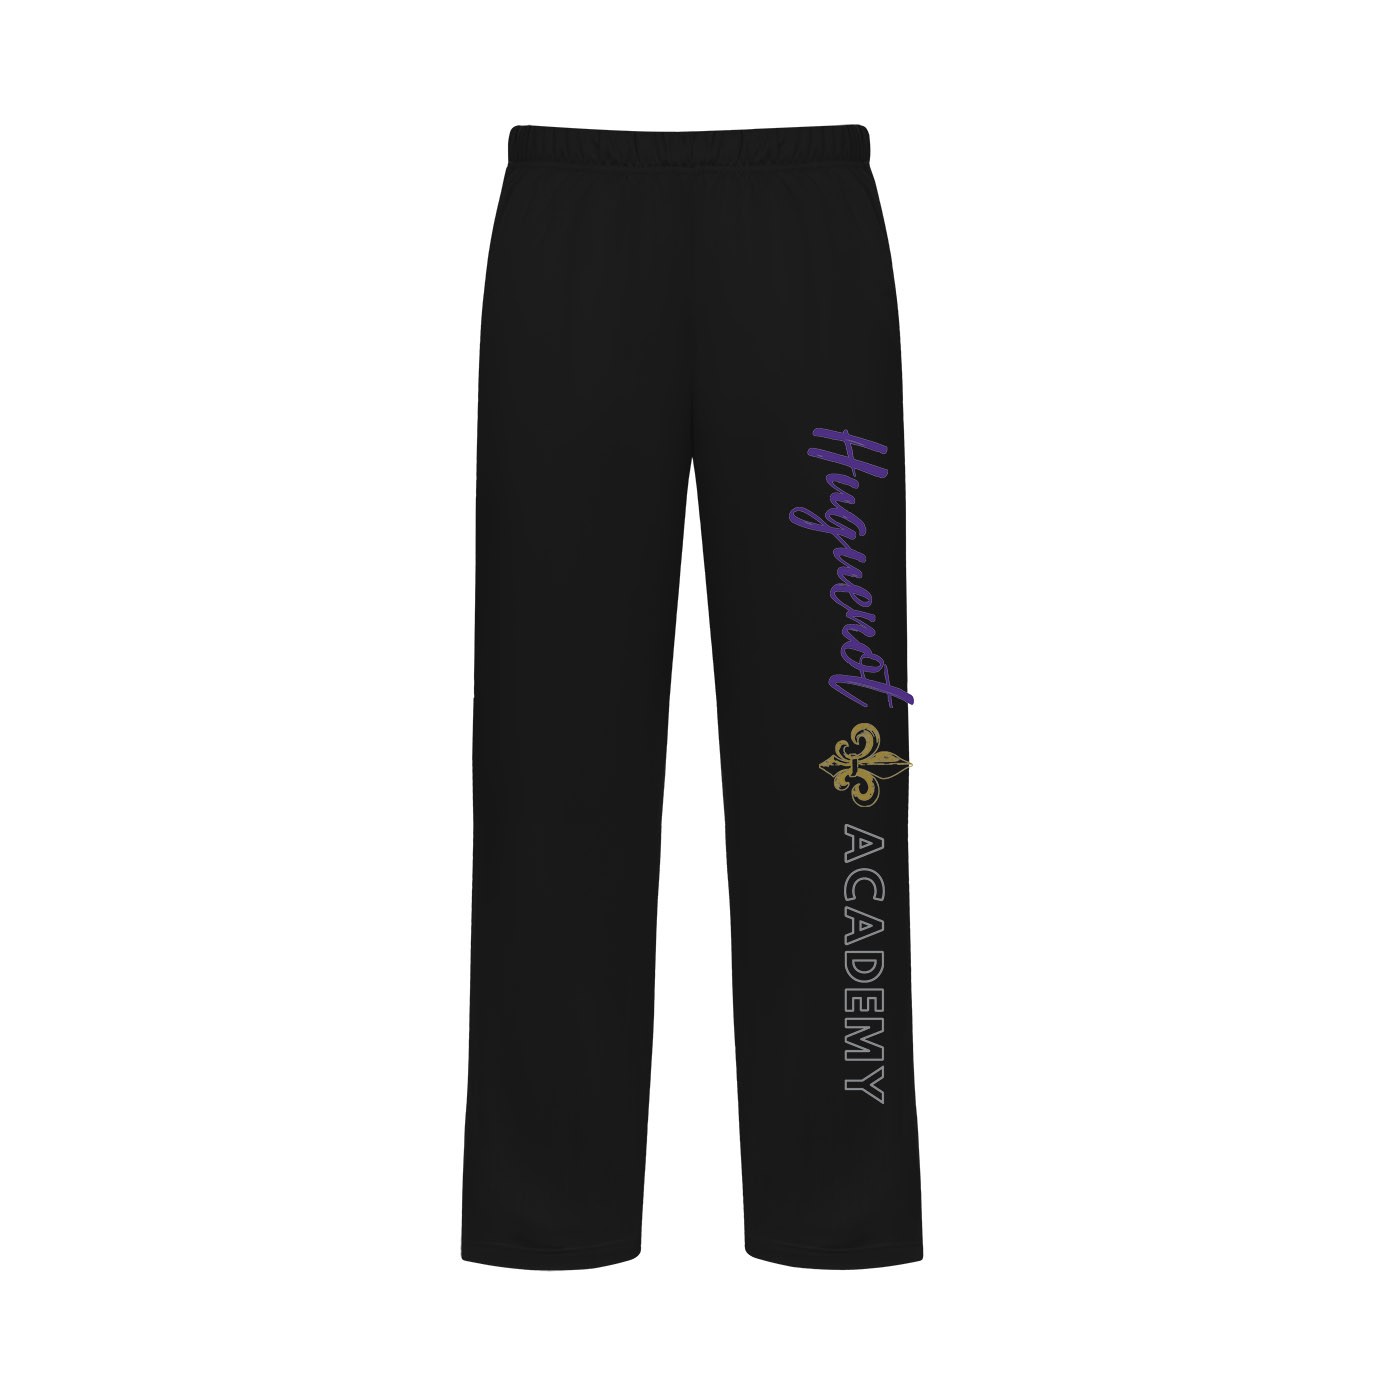 HA Spirit Nonelastic Sweatpant w/ Huguenot's logo- Please Allow 2-3 Weeks for Delivery